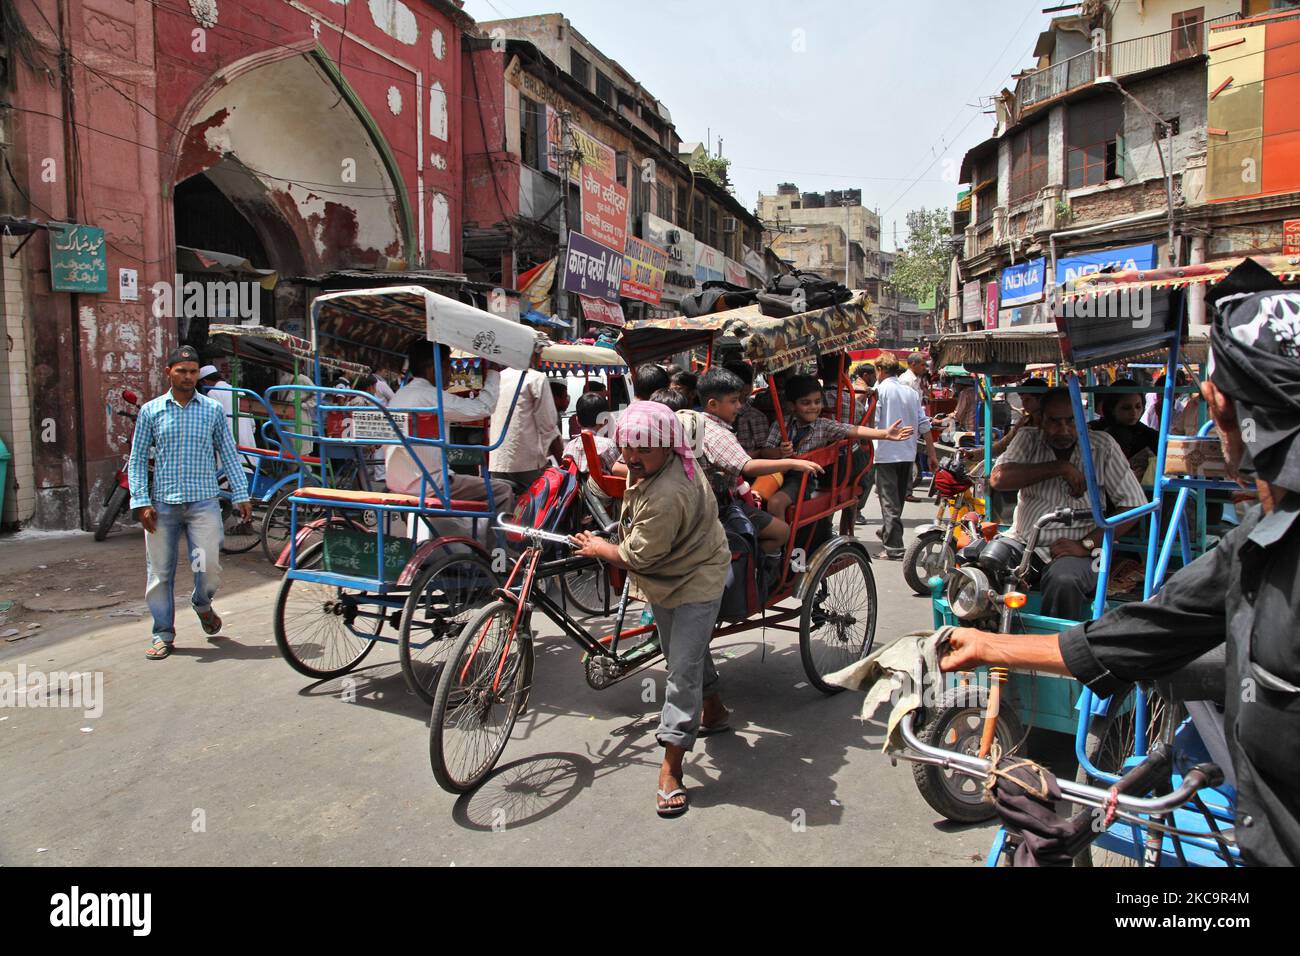 School children travel in an overload rickshaw along a busy street in the Chandni Chowk Market in Old Delhi, India. Chandni Chowk is Asia's largest wholesale market. Legend has it that Mughal emperor Shah Jahan planned Chandni Chowk in the 17th century so that his daughter could shop for all that she wanted. Chandni Chowk, meaning moonlit square or market remains one of the city's most crowded, chaotic and famous areas. (Photo by Creative Touch Imaging Ltd./NurPhoto) Stock Photo